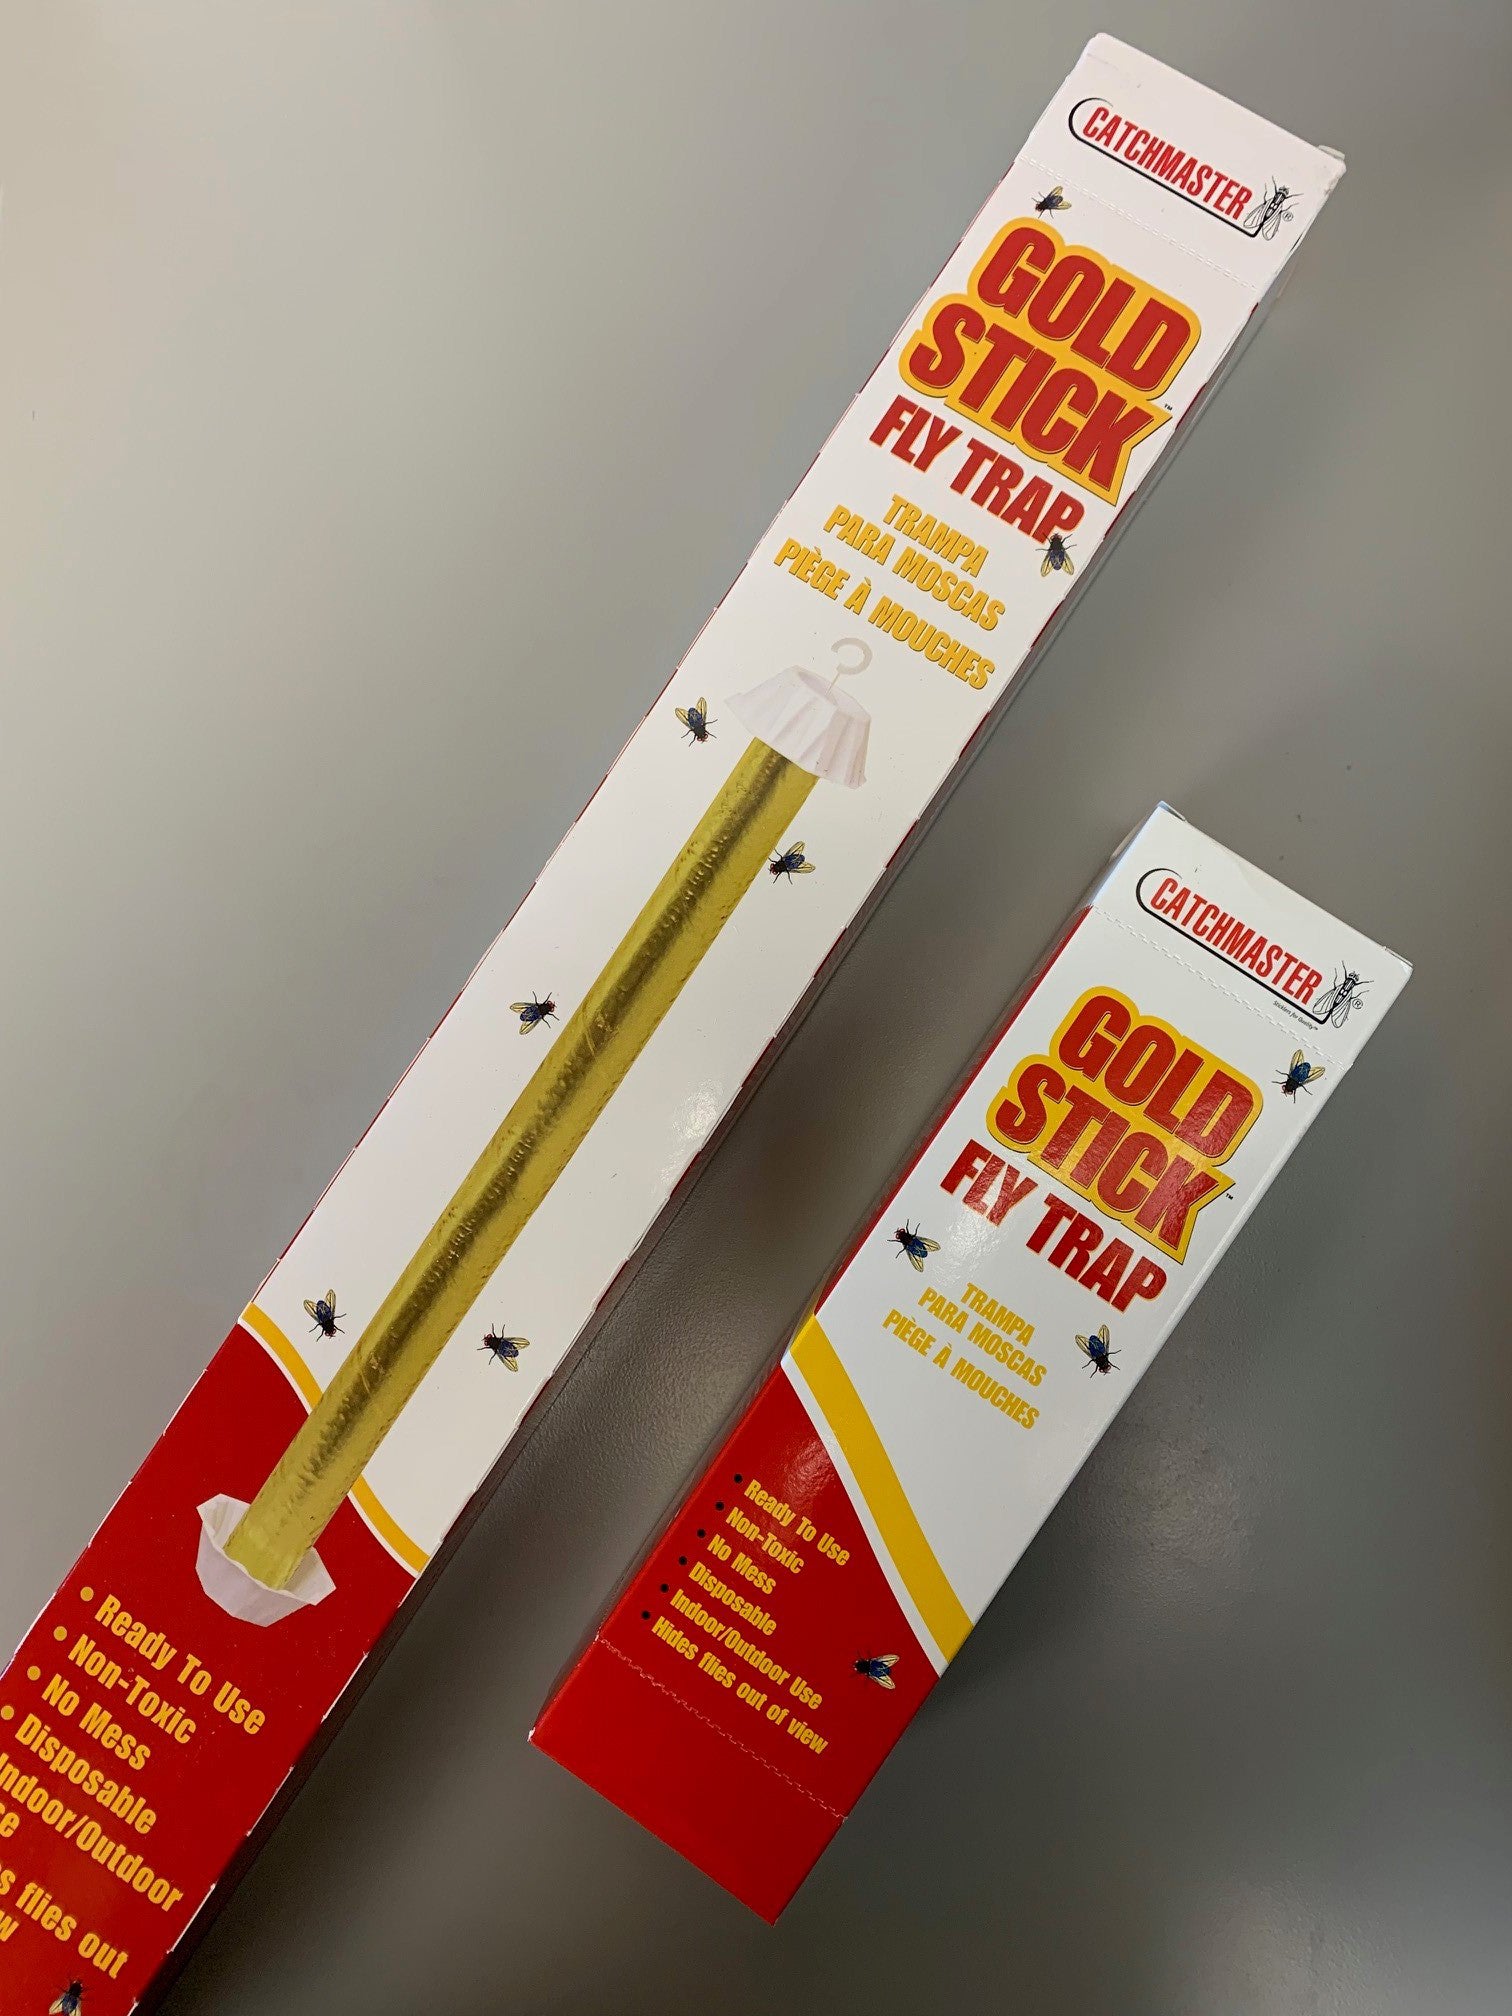 Catchmaster Gold Sticks with fly pheromone attractant